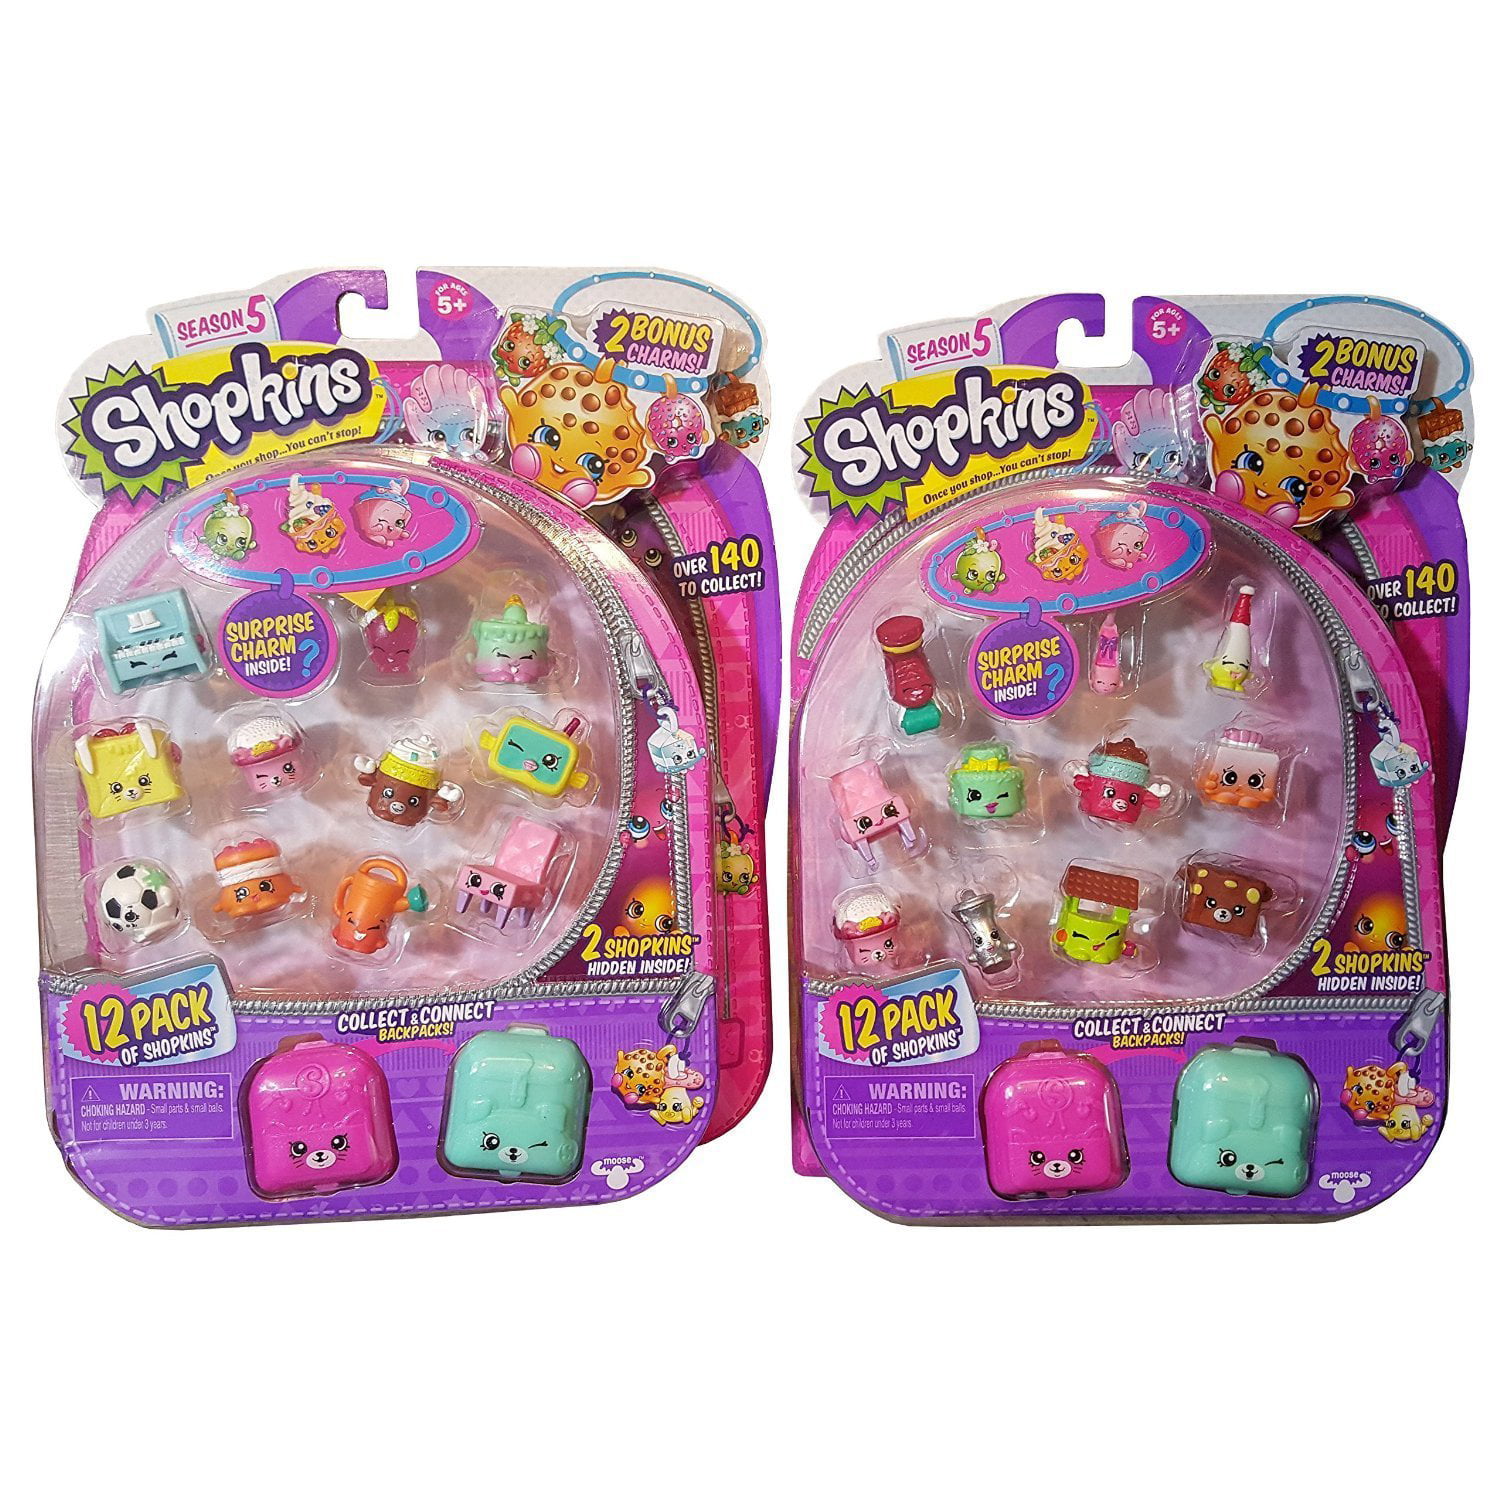 Shopkins S5 Season 5 12 Pack bundle of 6  as the picture 